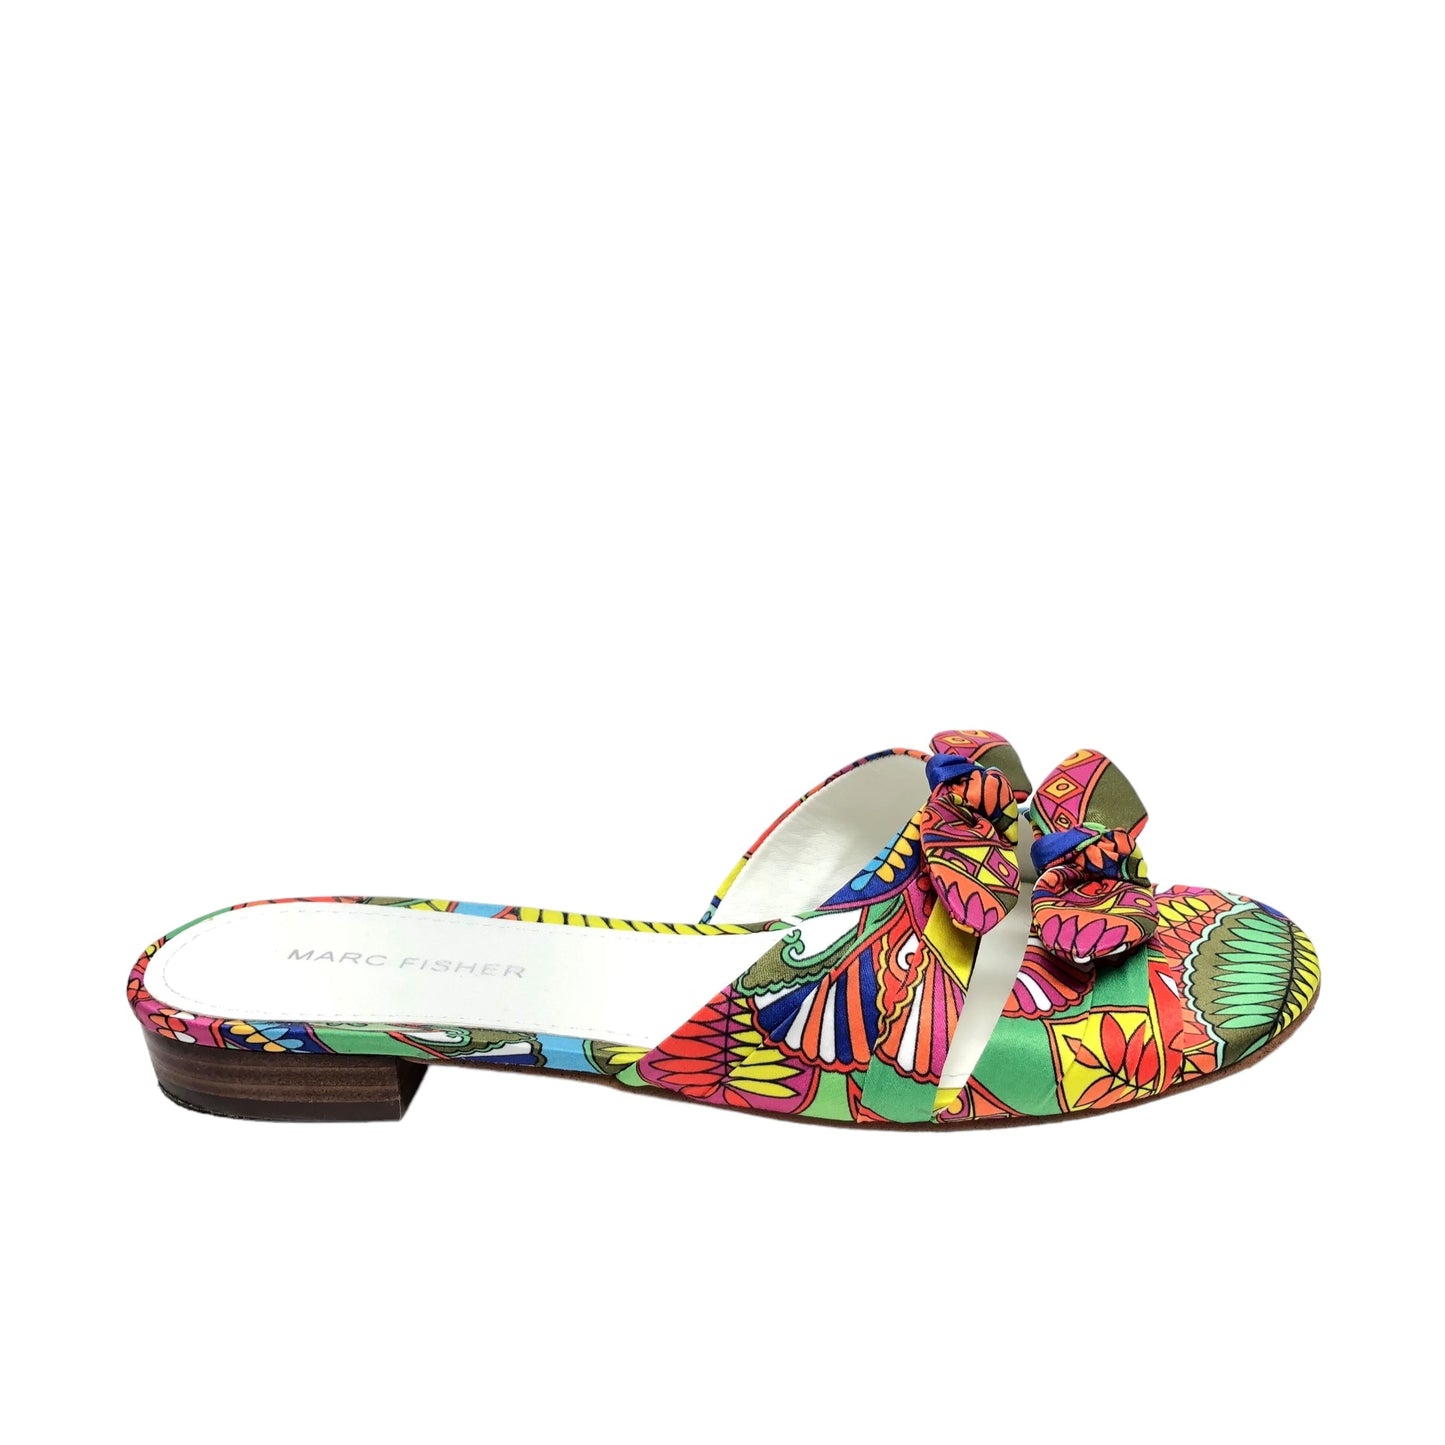 Multi-colored Sandals Flats Marc Fisher, Size 7.5